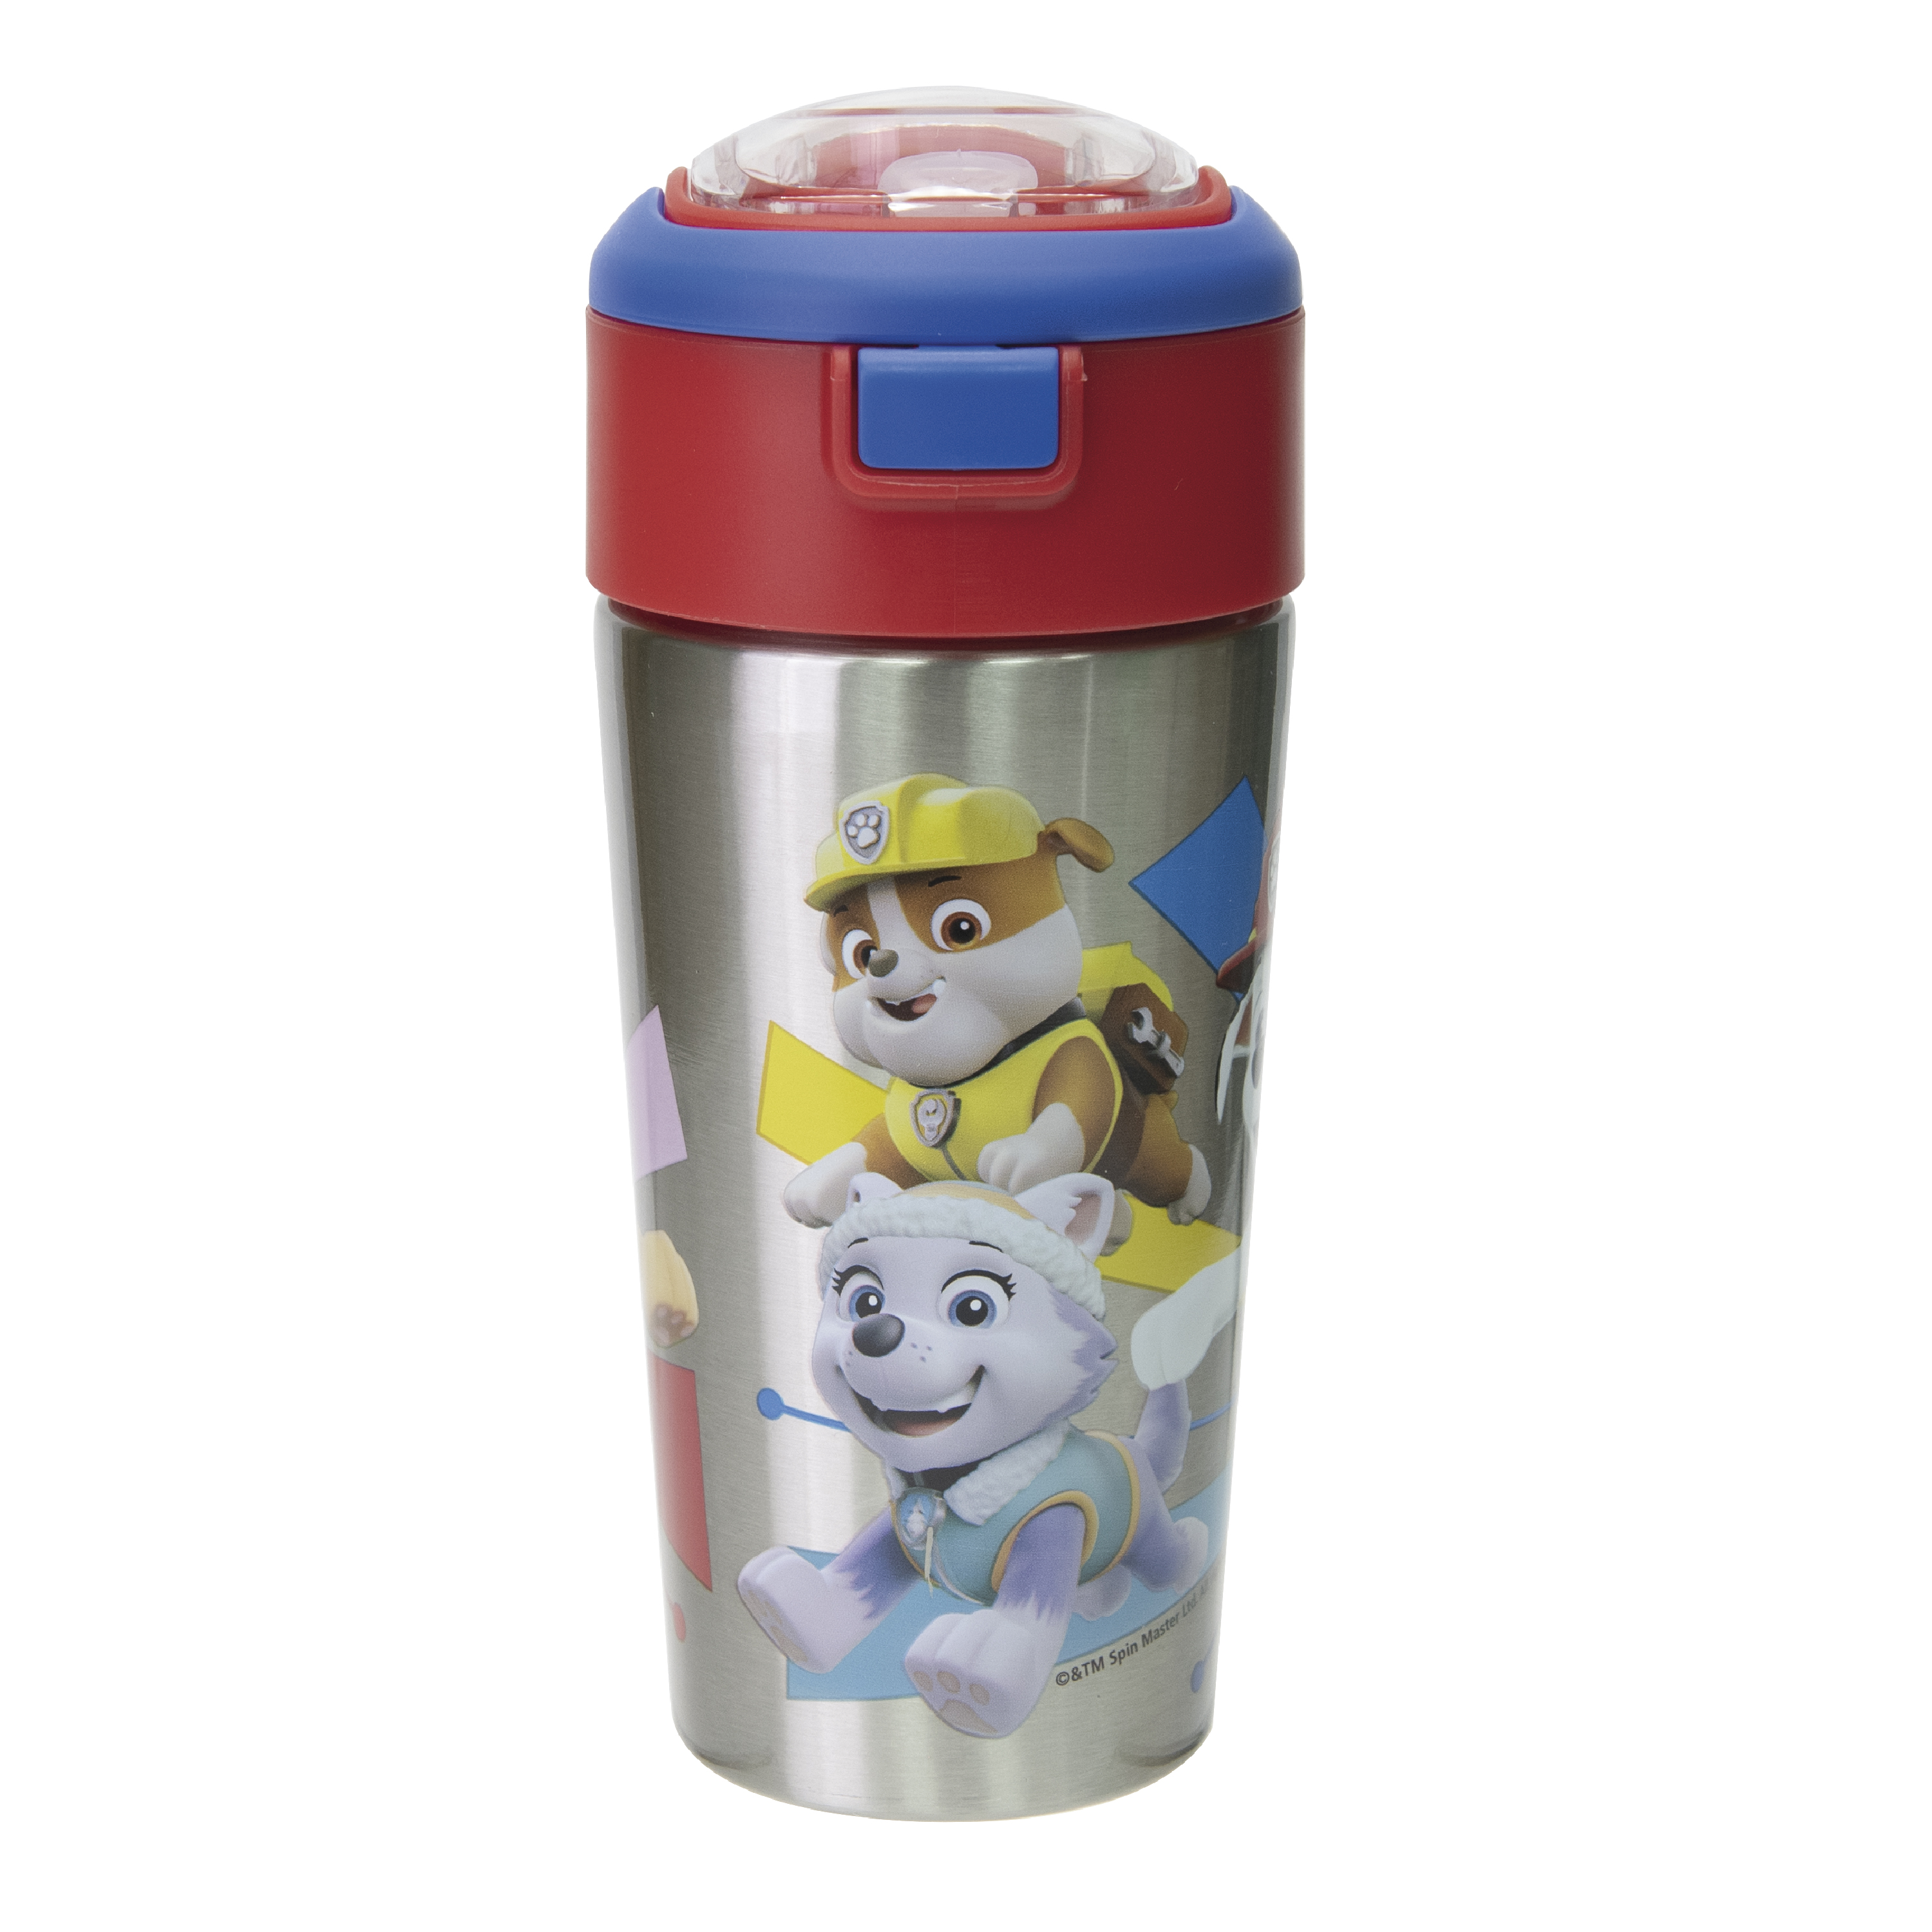 Paw Patrol 12 ounce Vacuum Insulated Reusable Stainless Steel Water Bottle, Skye, Rubble & Friends slideshow image 1